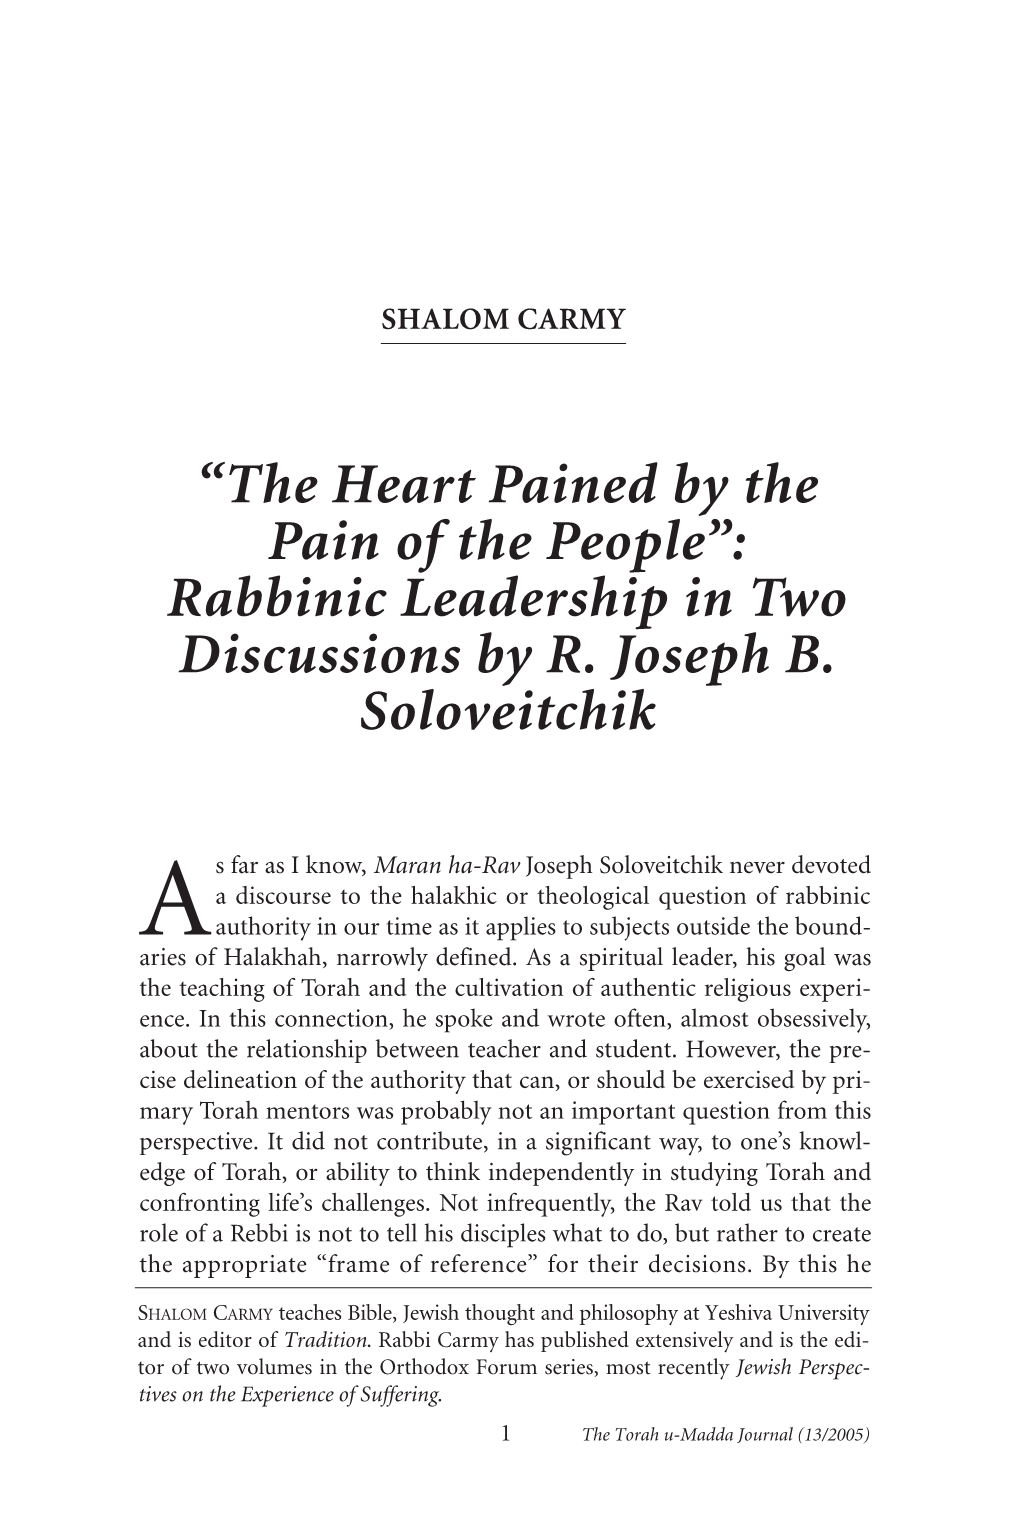 Rabbinic Leadership in Two Discussions by R